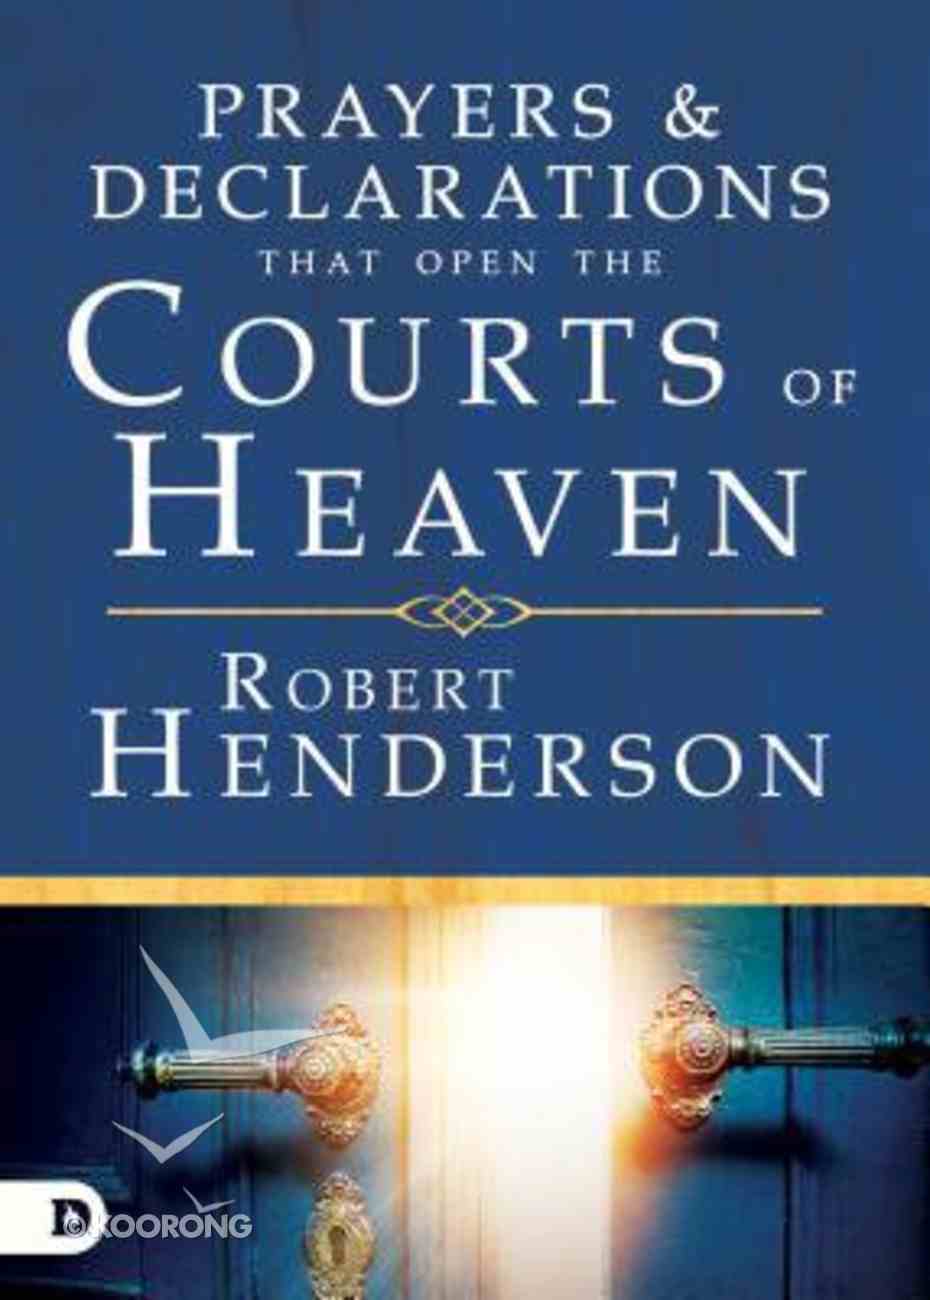 Prayers & Declarations That Open the Courts of Heaven Hardback